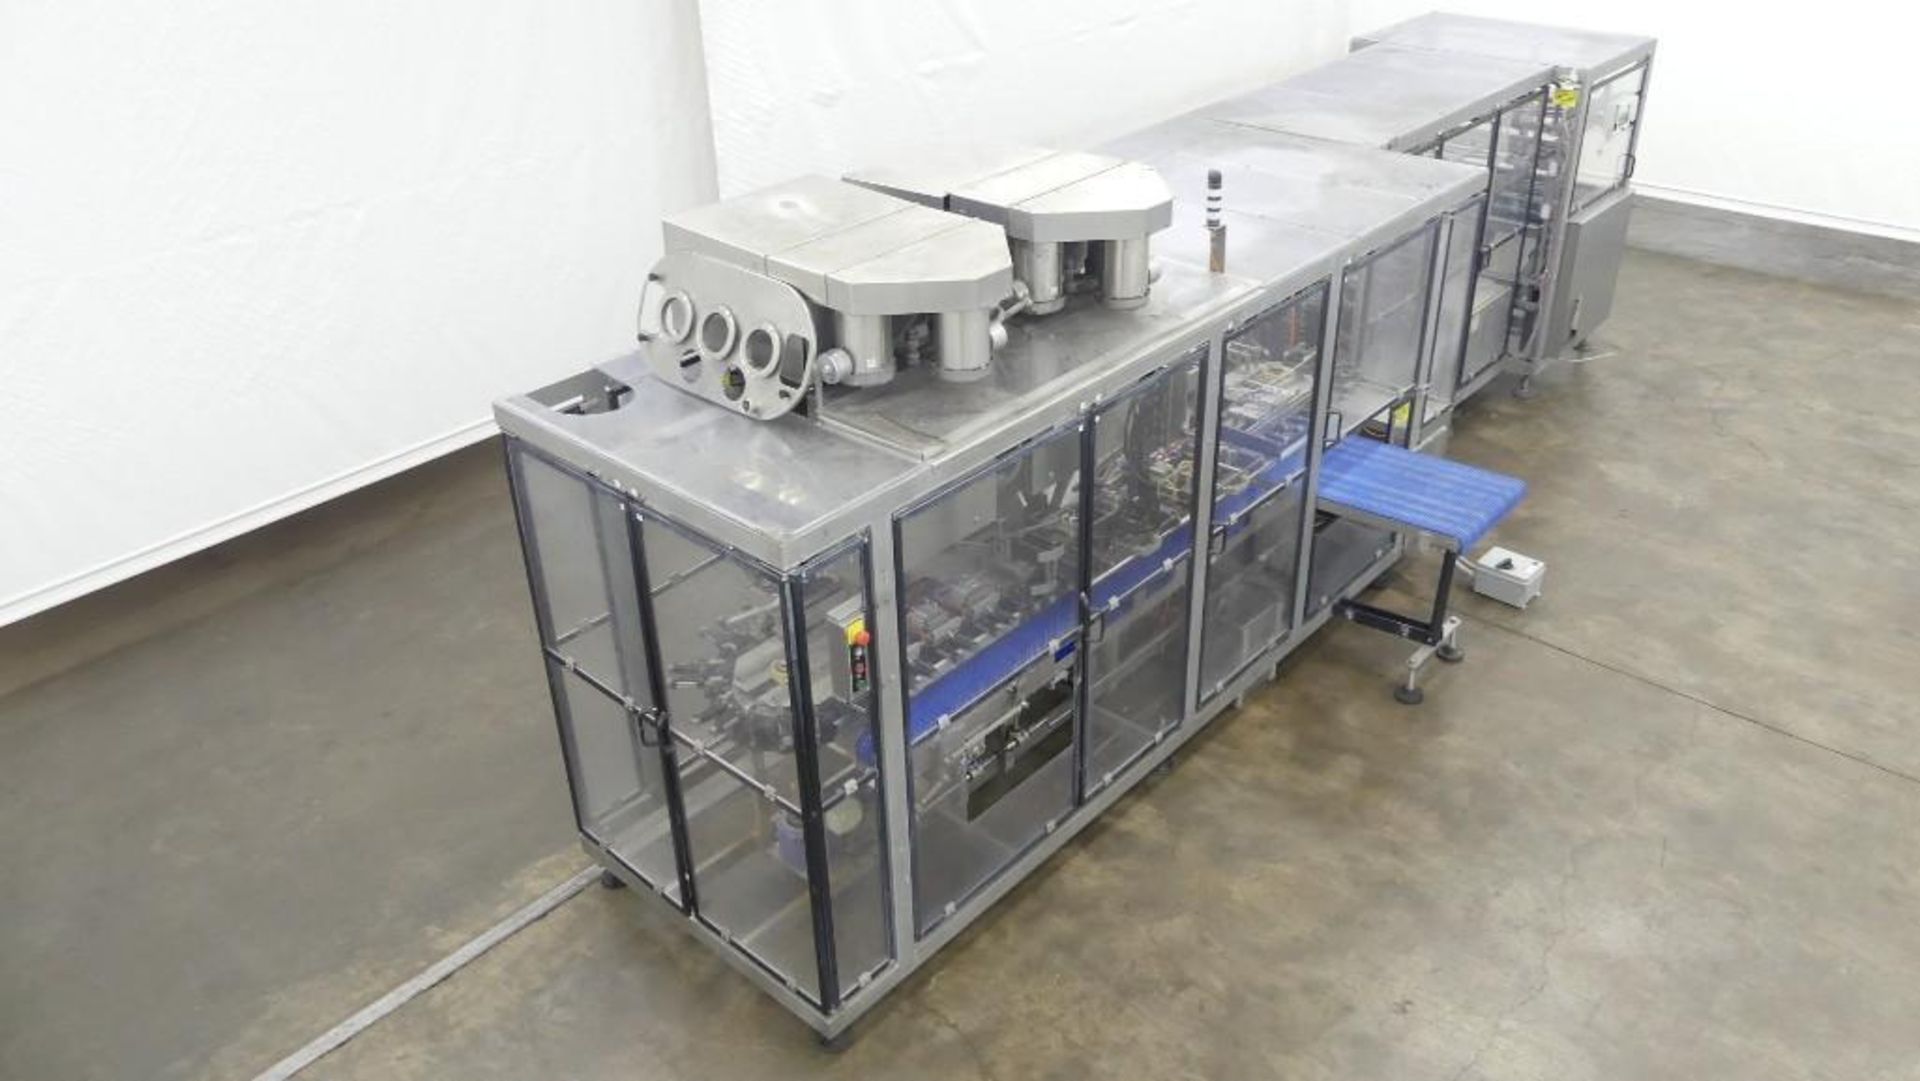 Massman HFFS-IM0800 Flexible Pouch Packaging System - Image 6 of 29